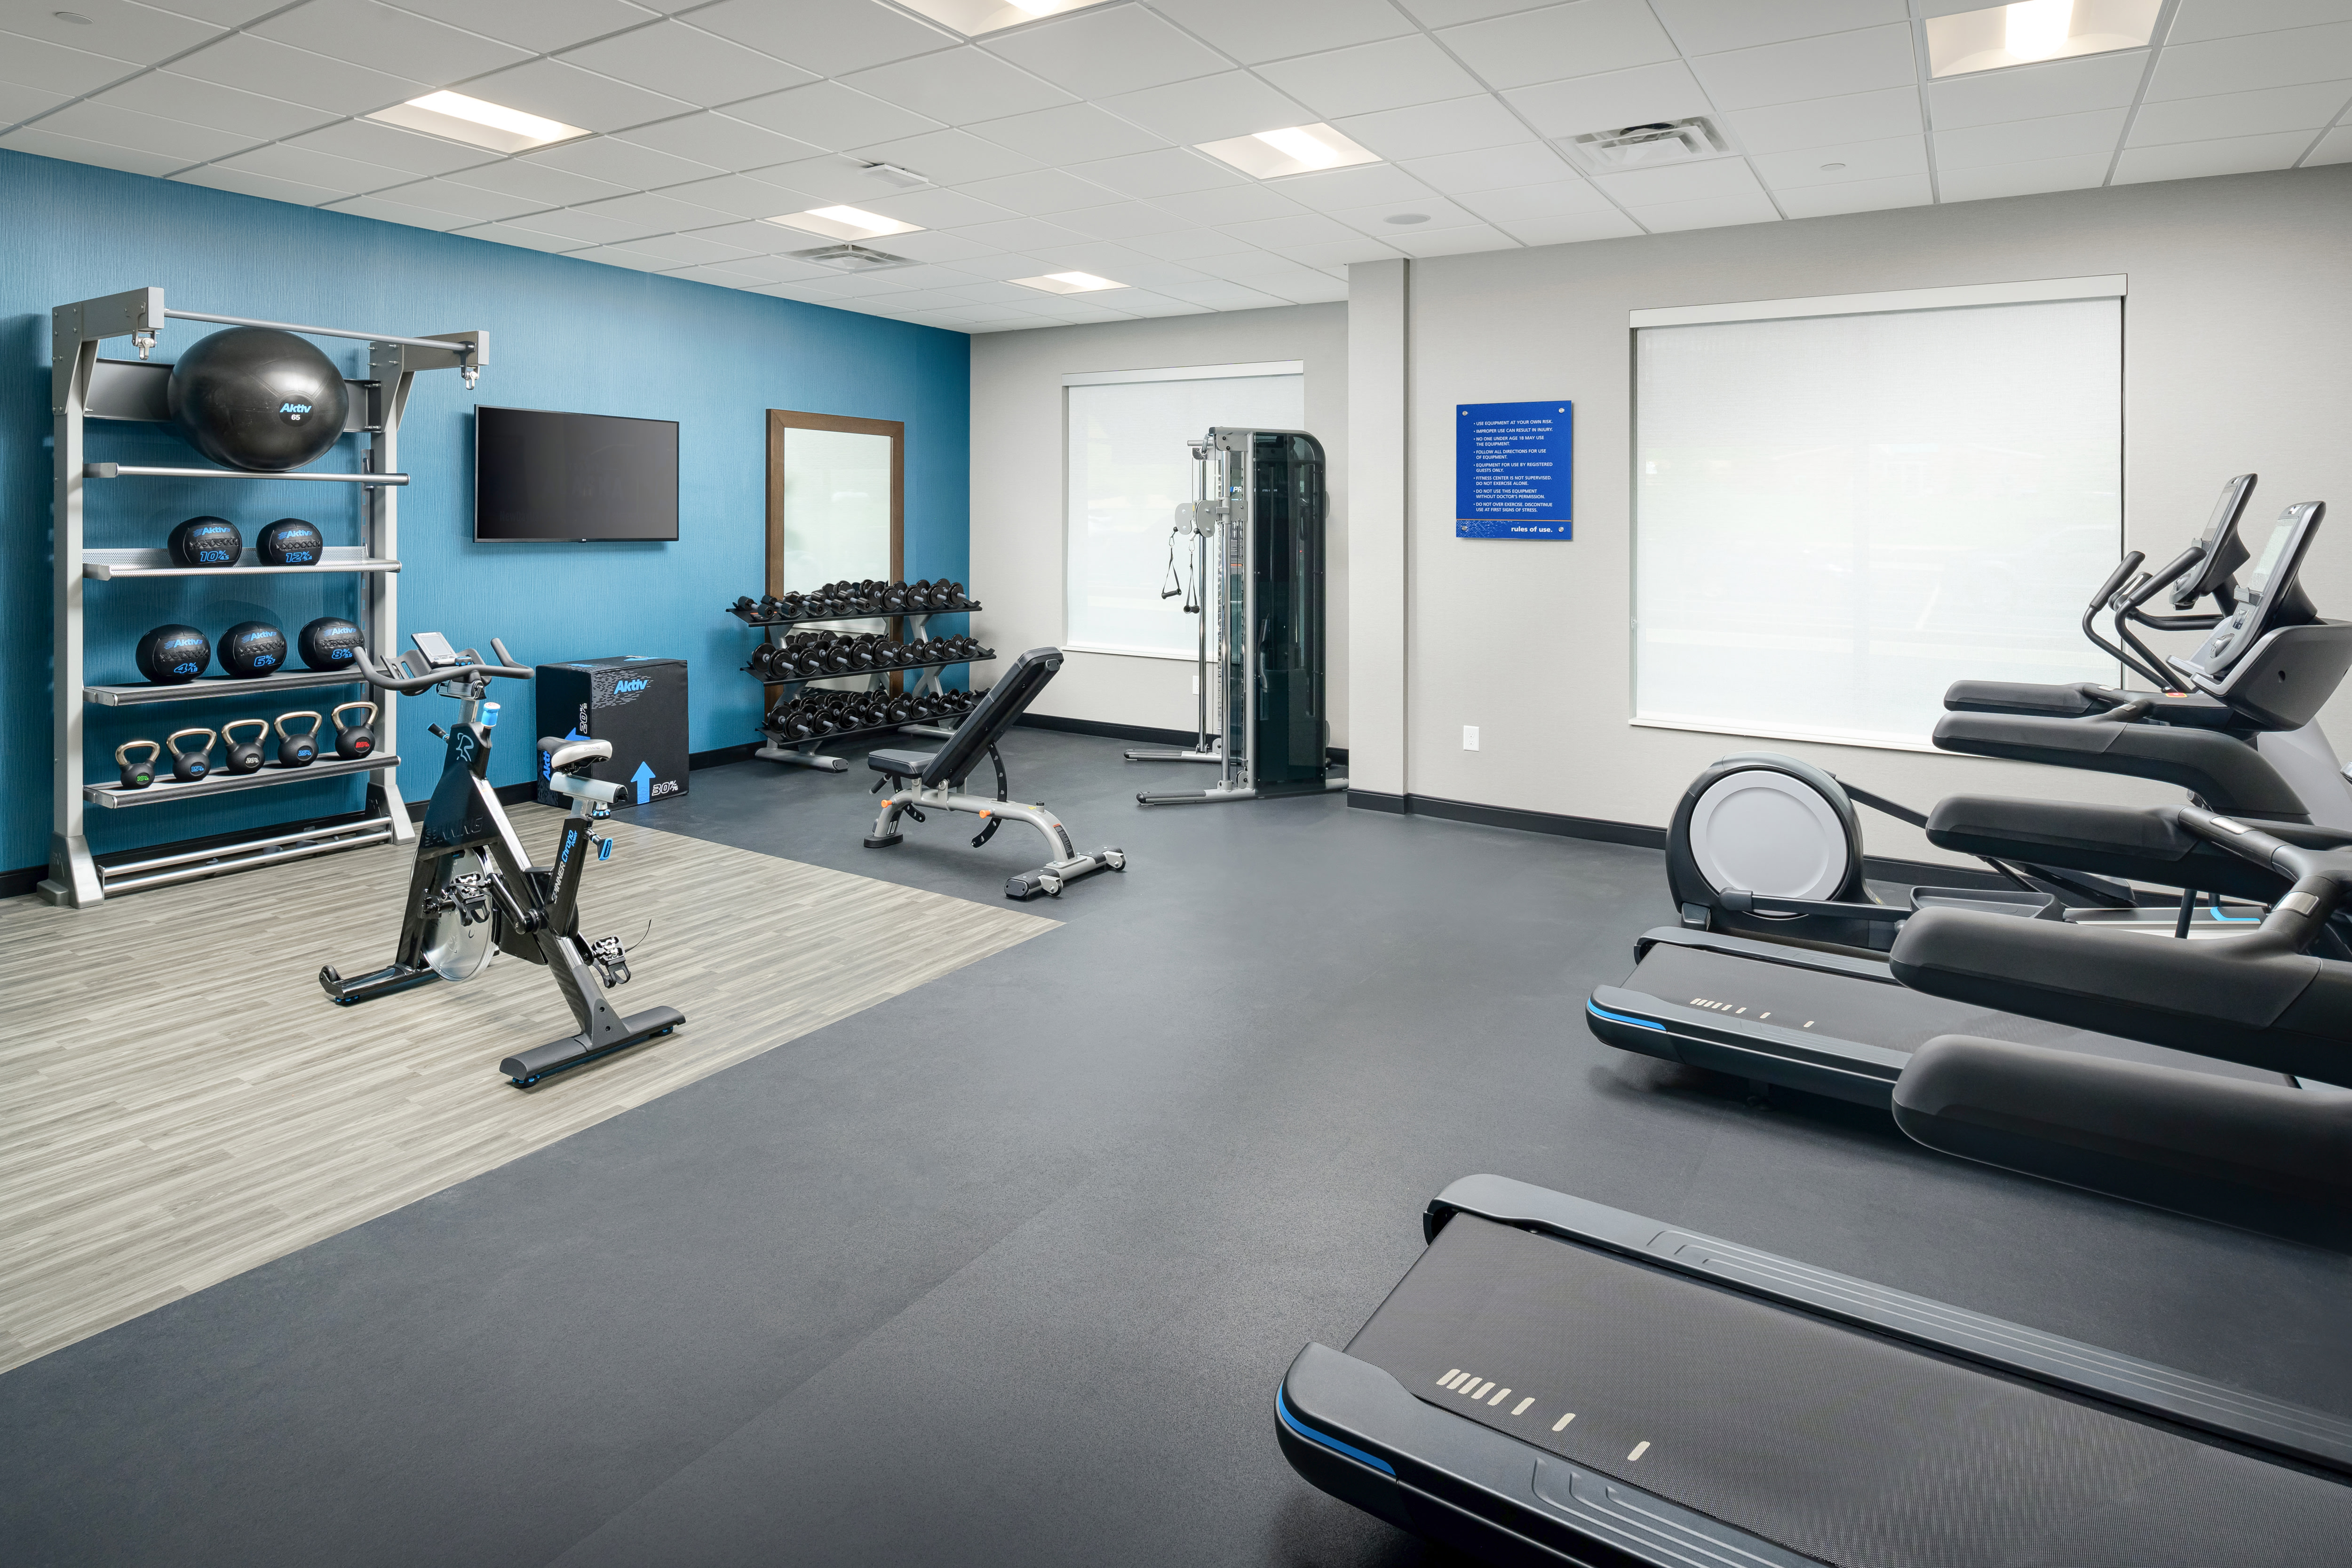 Treadmills Weights and HDTV in Fitness Center